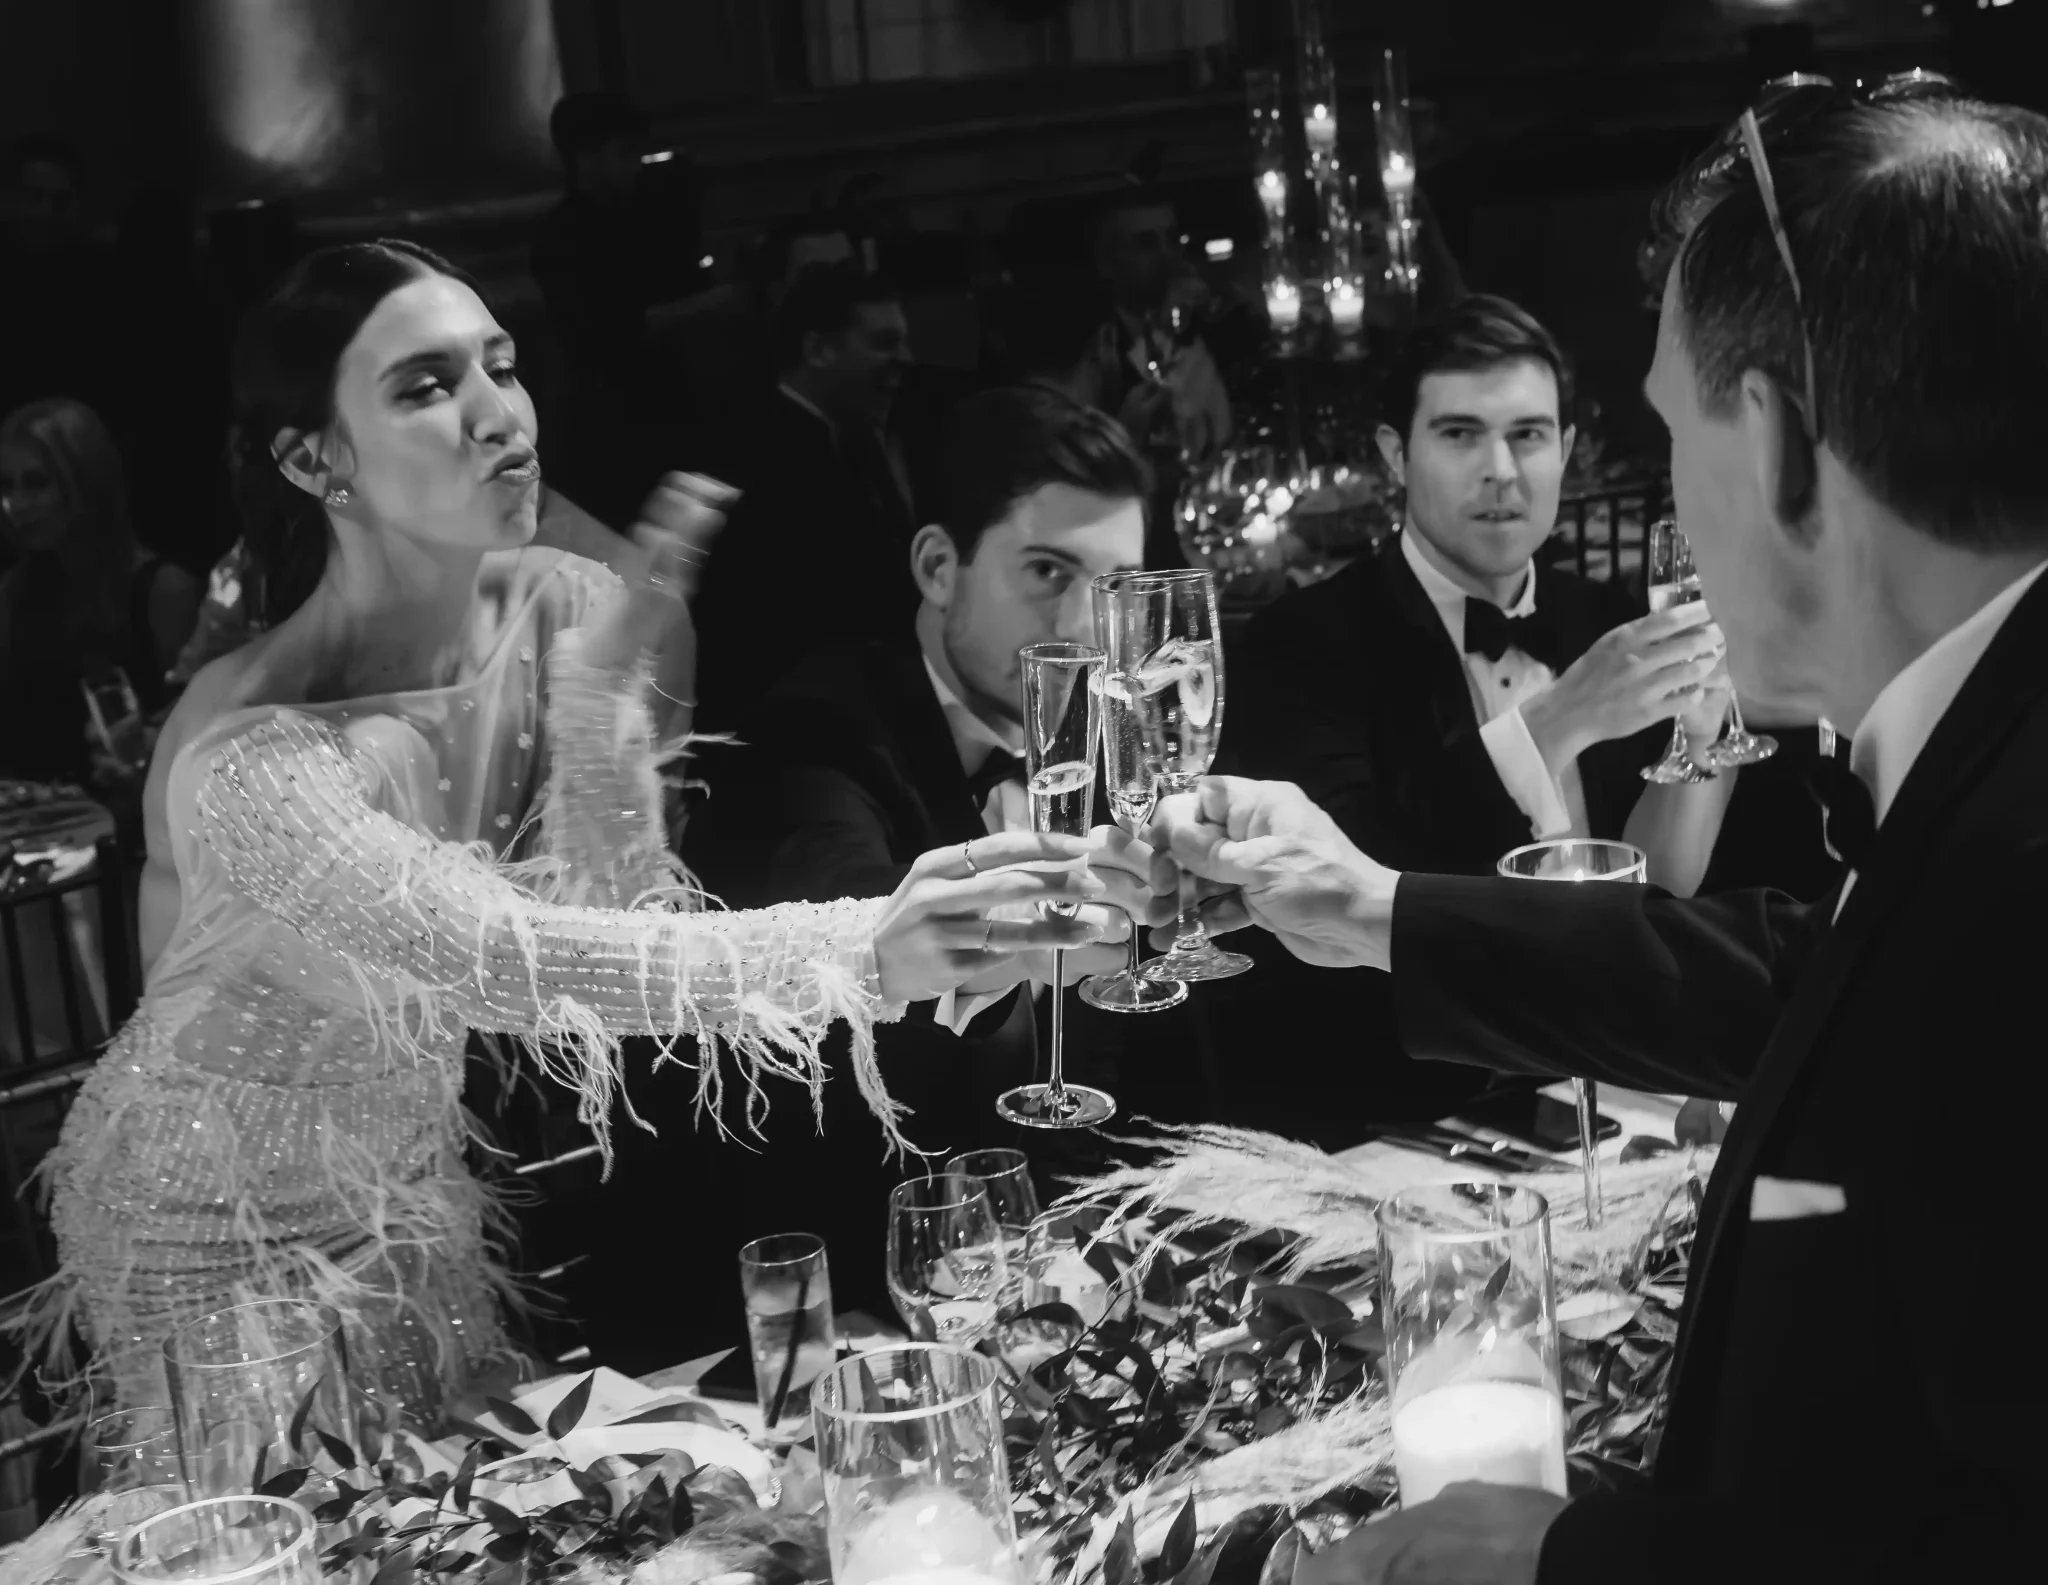 A black and white photo of people toasting at a dinner table.